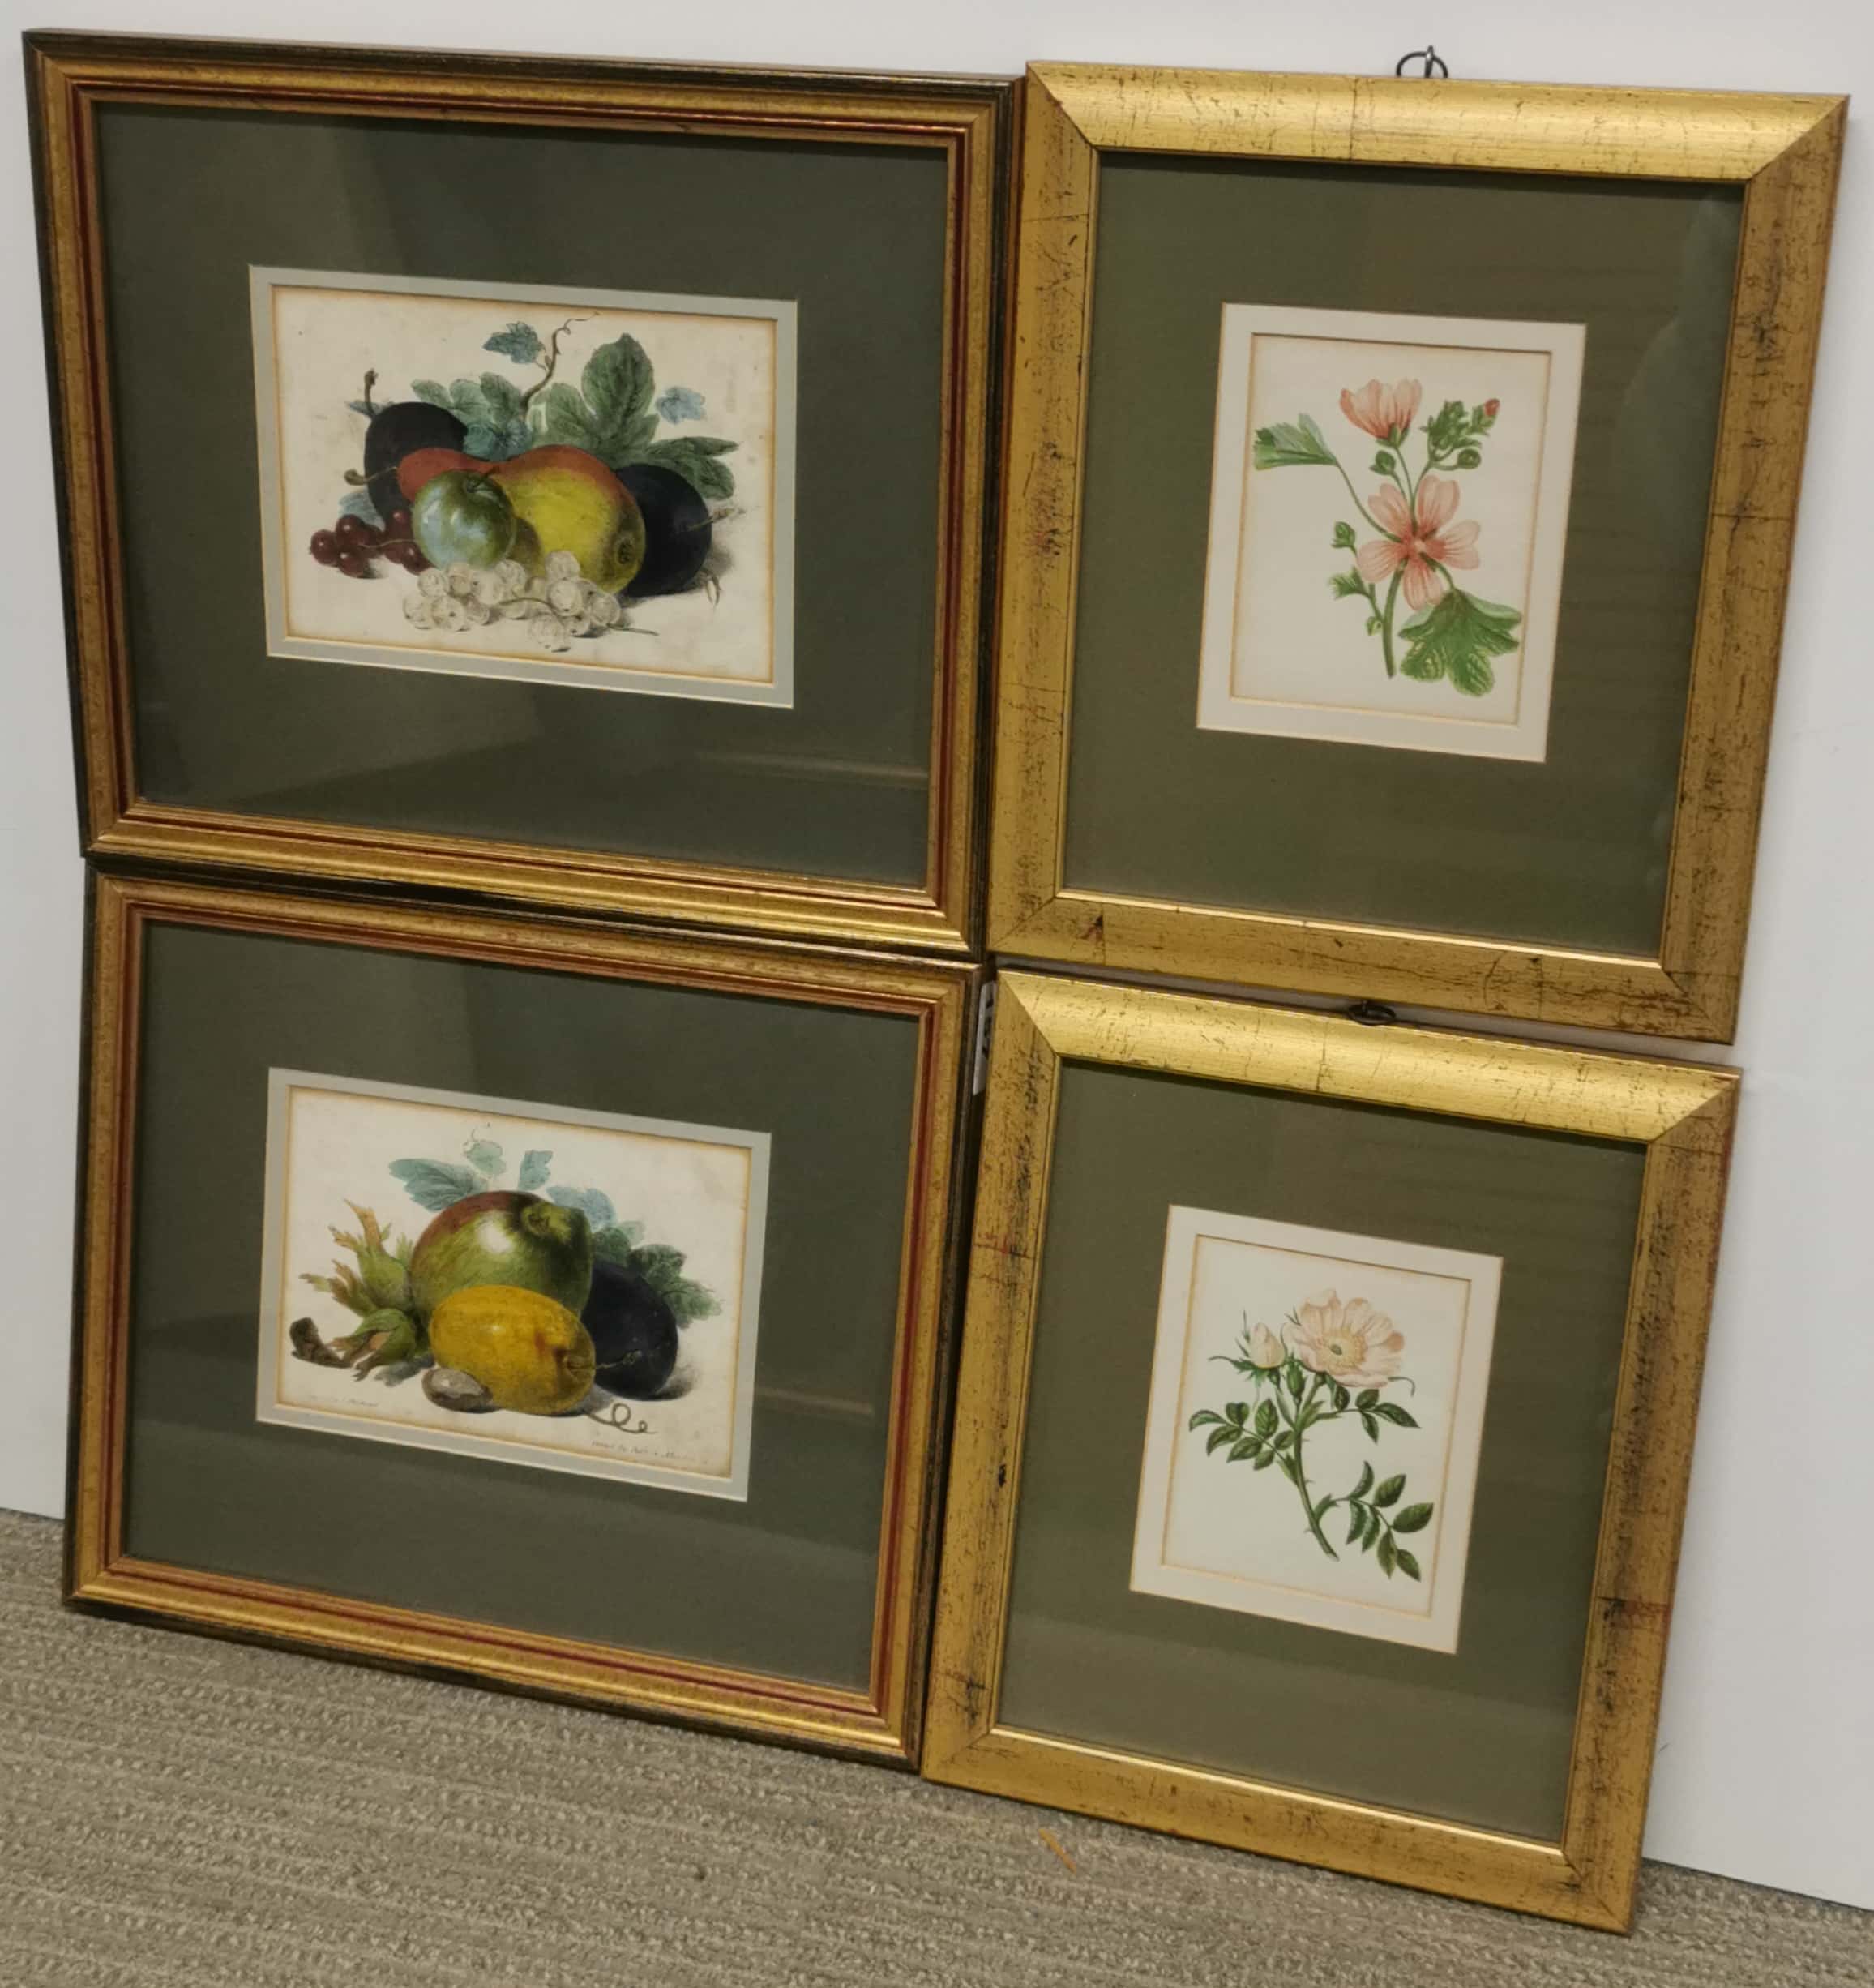 Four gilt framed 19th century prints of flowers and fruit, largest frame size 34 x 29cm.